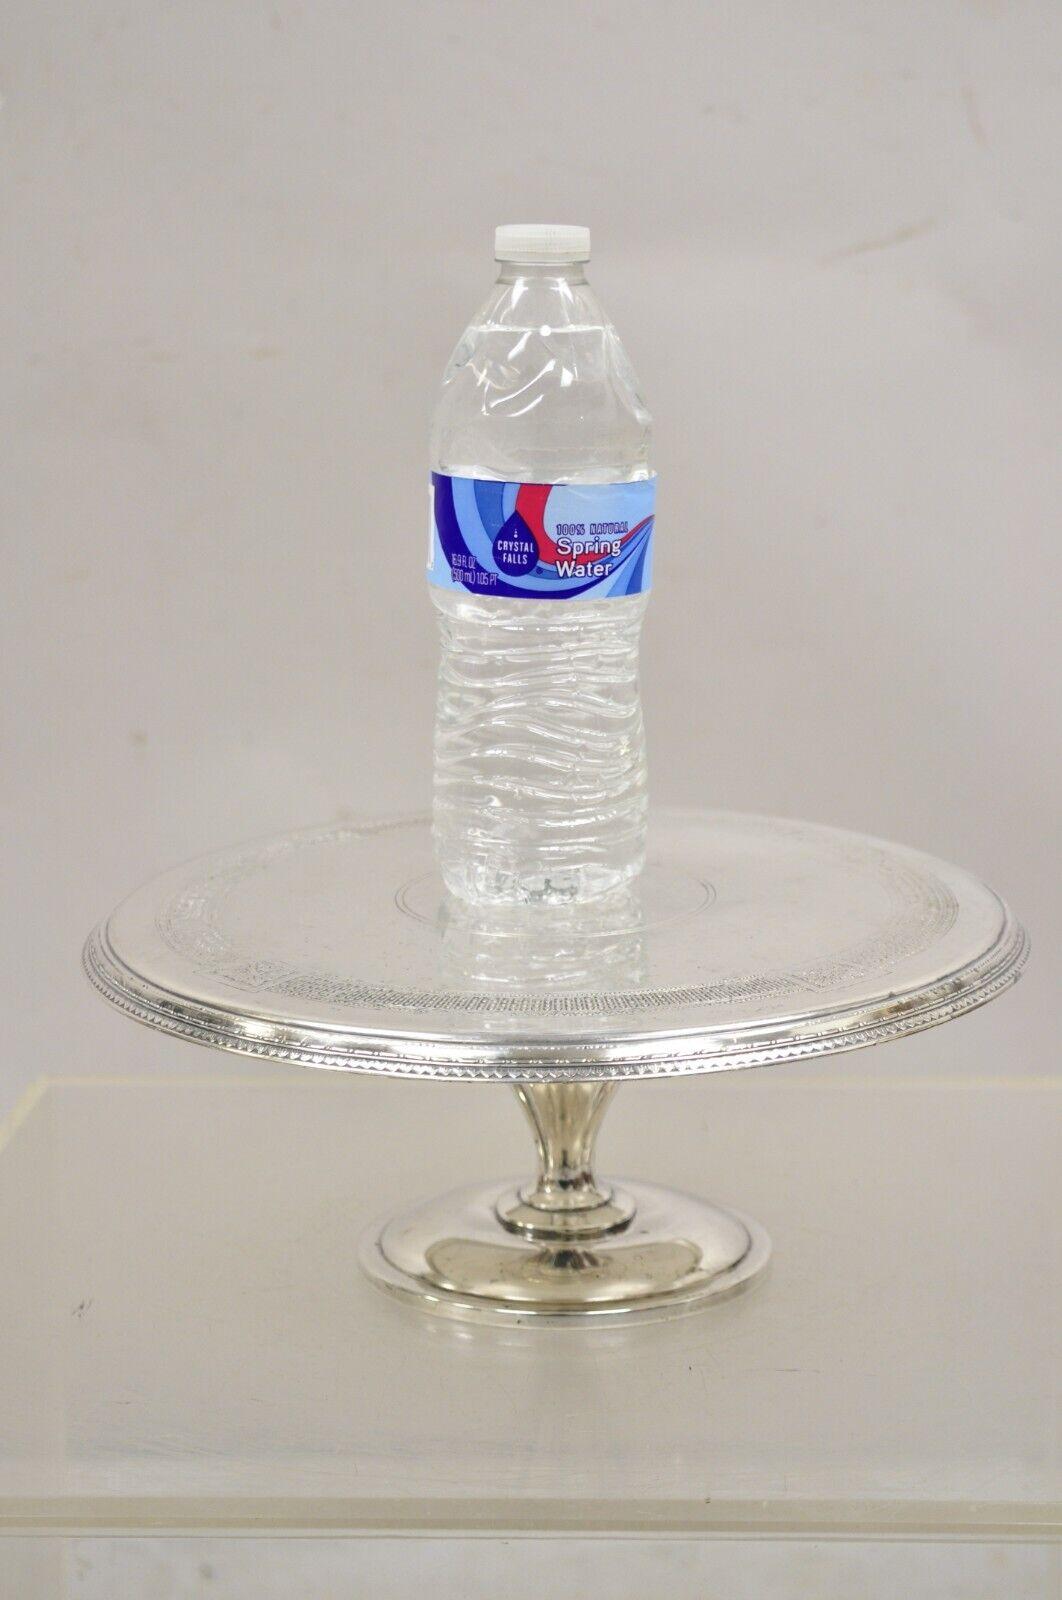 Pairpoint Antique Edwardian Silver Plated Pedestal Base Cake Stand Plate. Circa Early to Mid 1900s. Measurements:  4.5